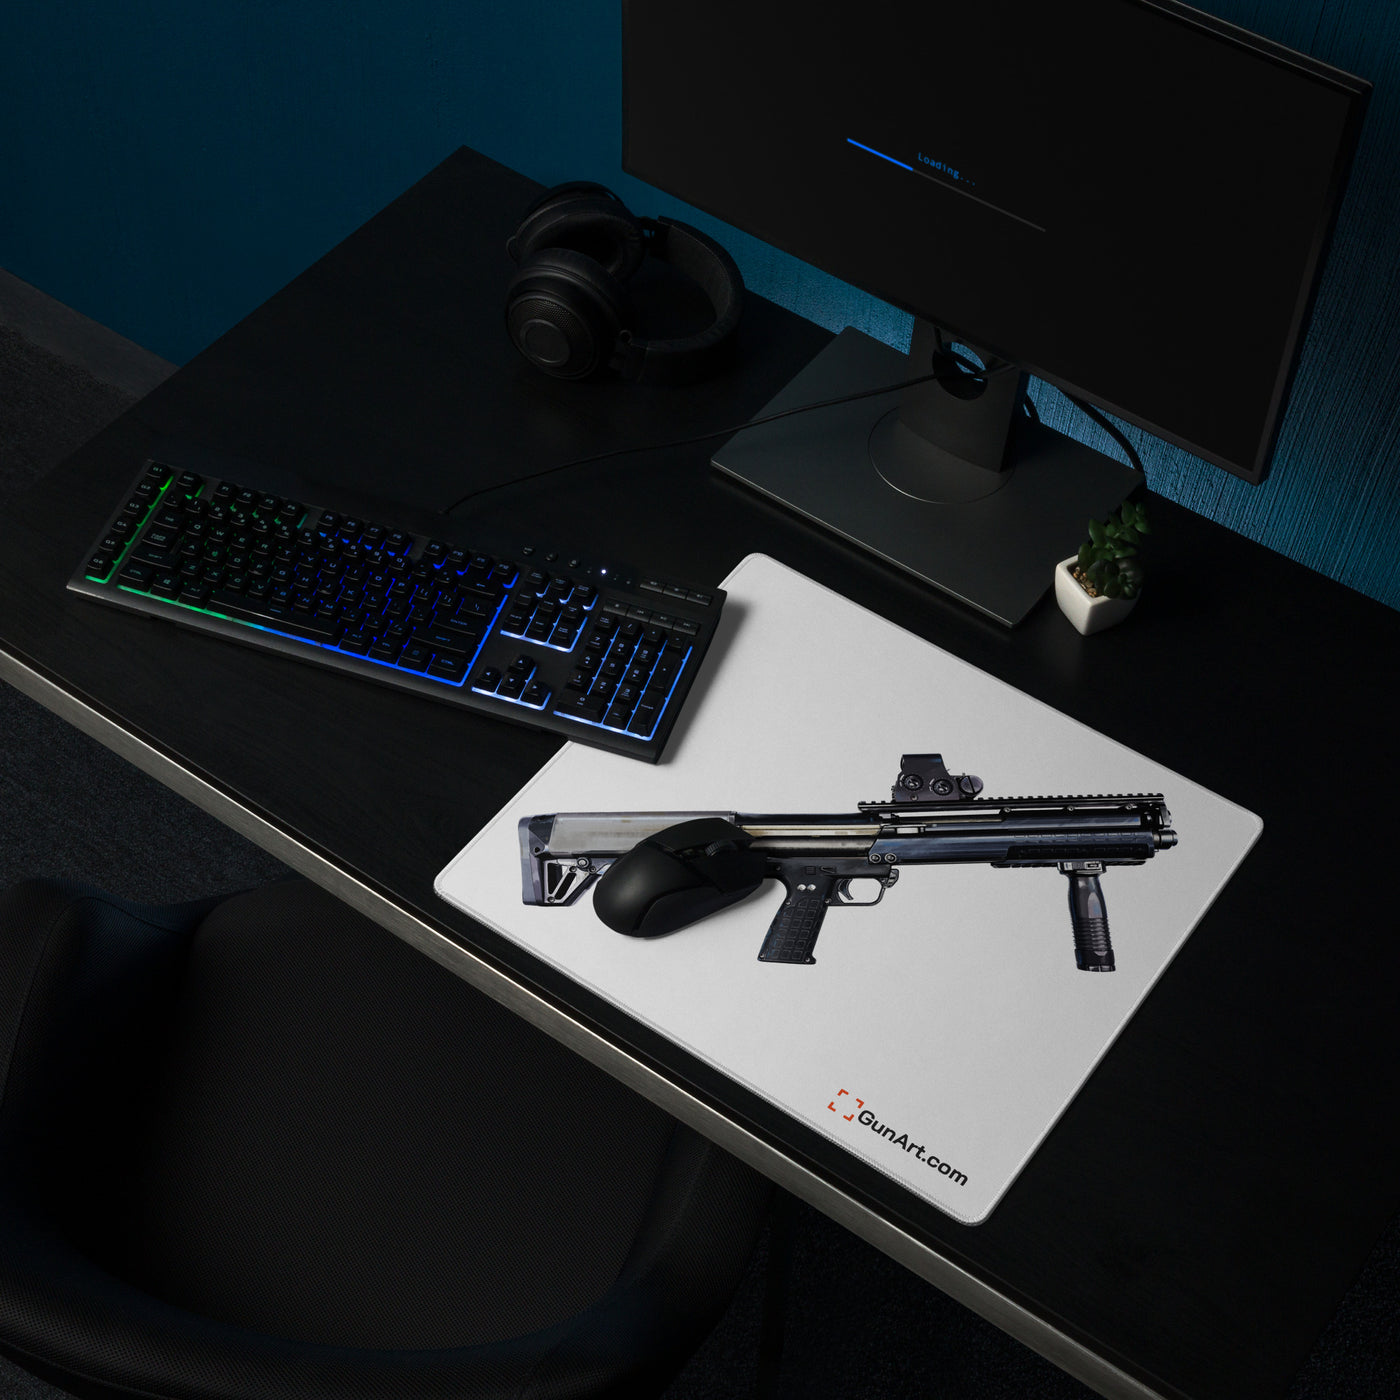 Tactical Bullpup Shotgun Gaming Mouse Pad - Just The Piece - White Background